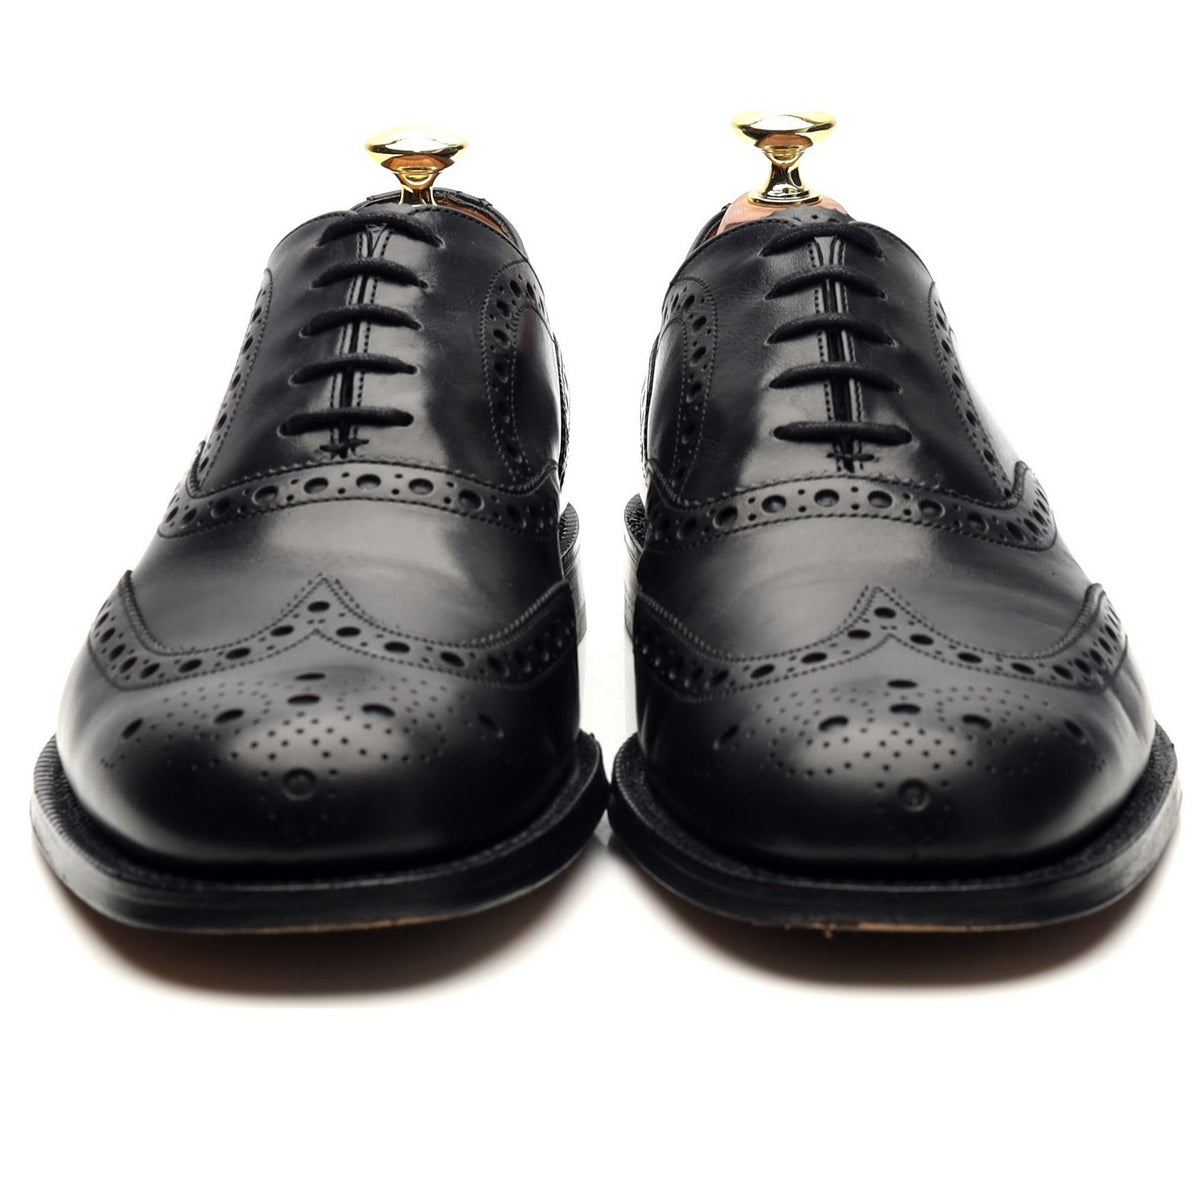 Black Leather Oxford Brogues UK 7.5 G